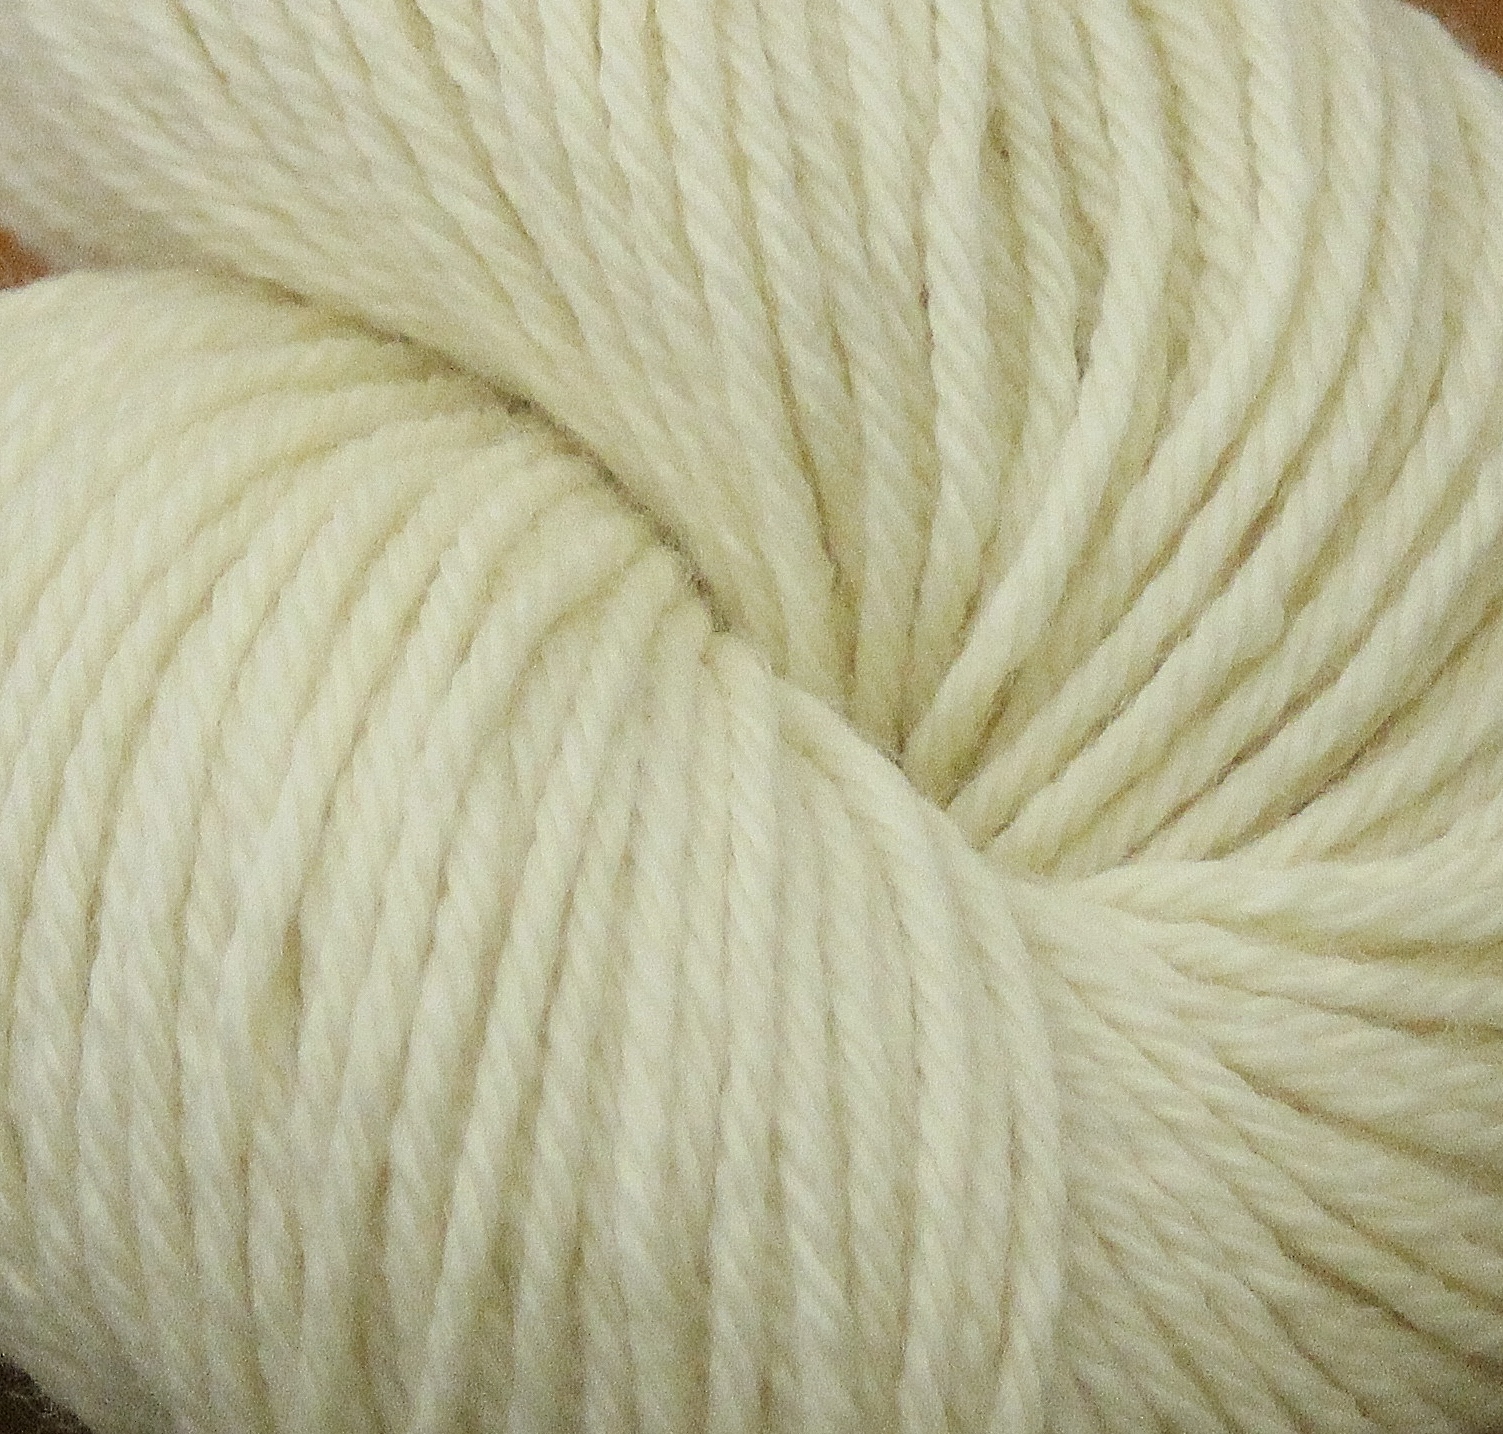 100% US Wool Worsted Weight Undyed Yarn